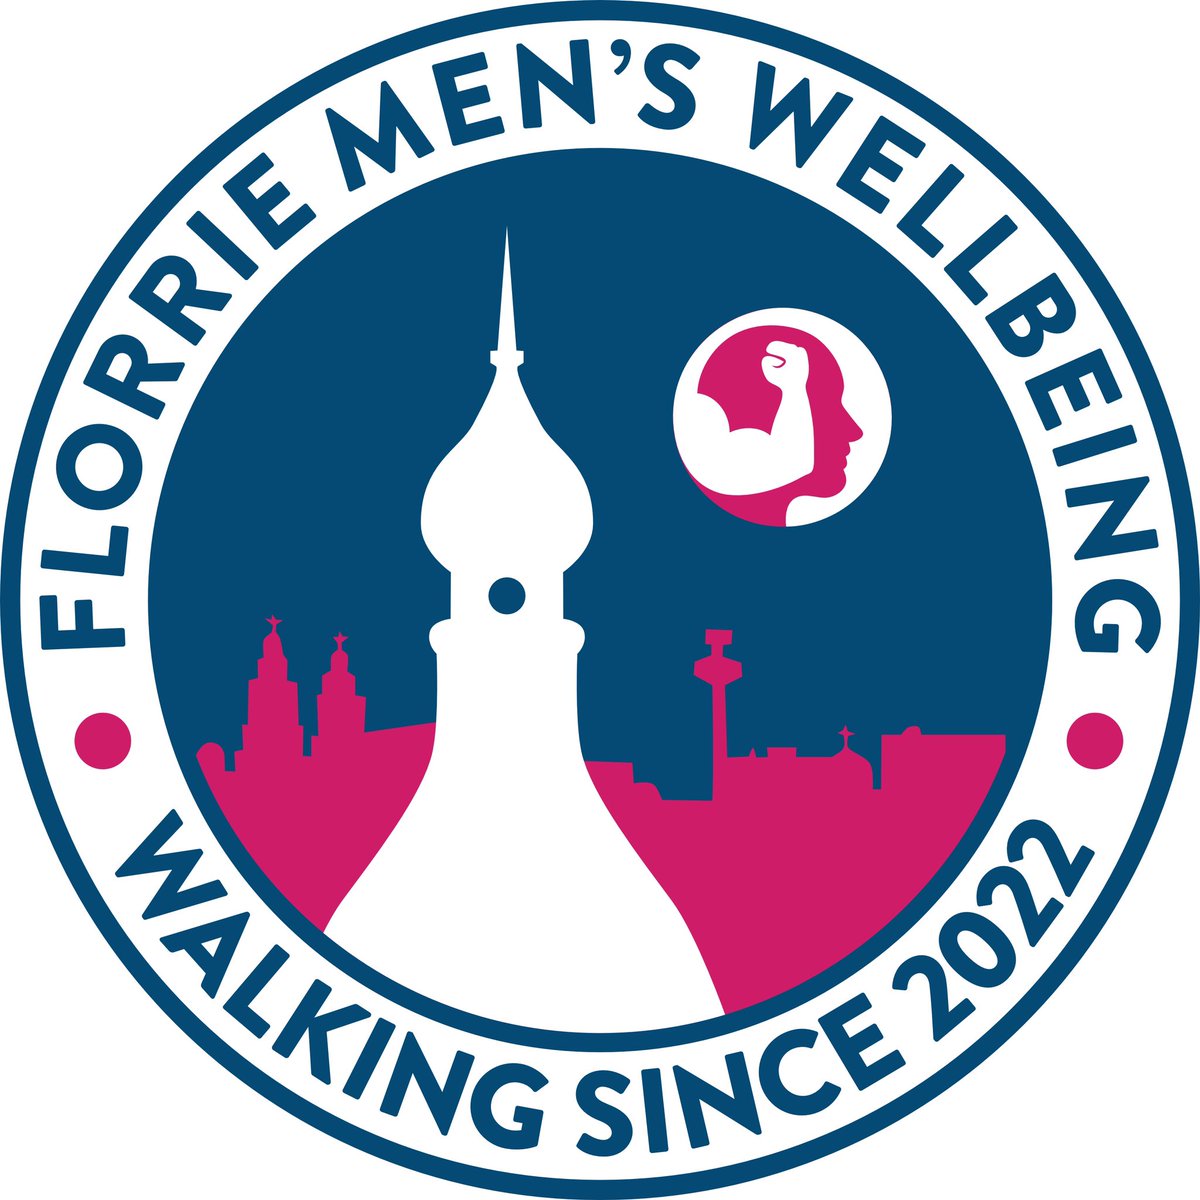 @WalkFlorrie leaving today at 10.30 We’d love to meet you yknow. If you feel you need to get something g off your chest, if you need to stretch the legs, if you have a couple of hours to spare, if you need cheering up? Please pop along & get involved. #NeverAlone